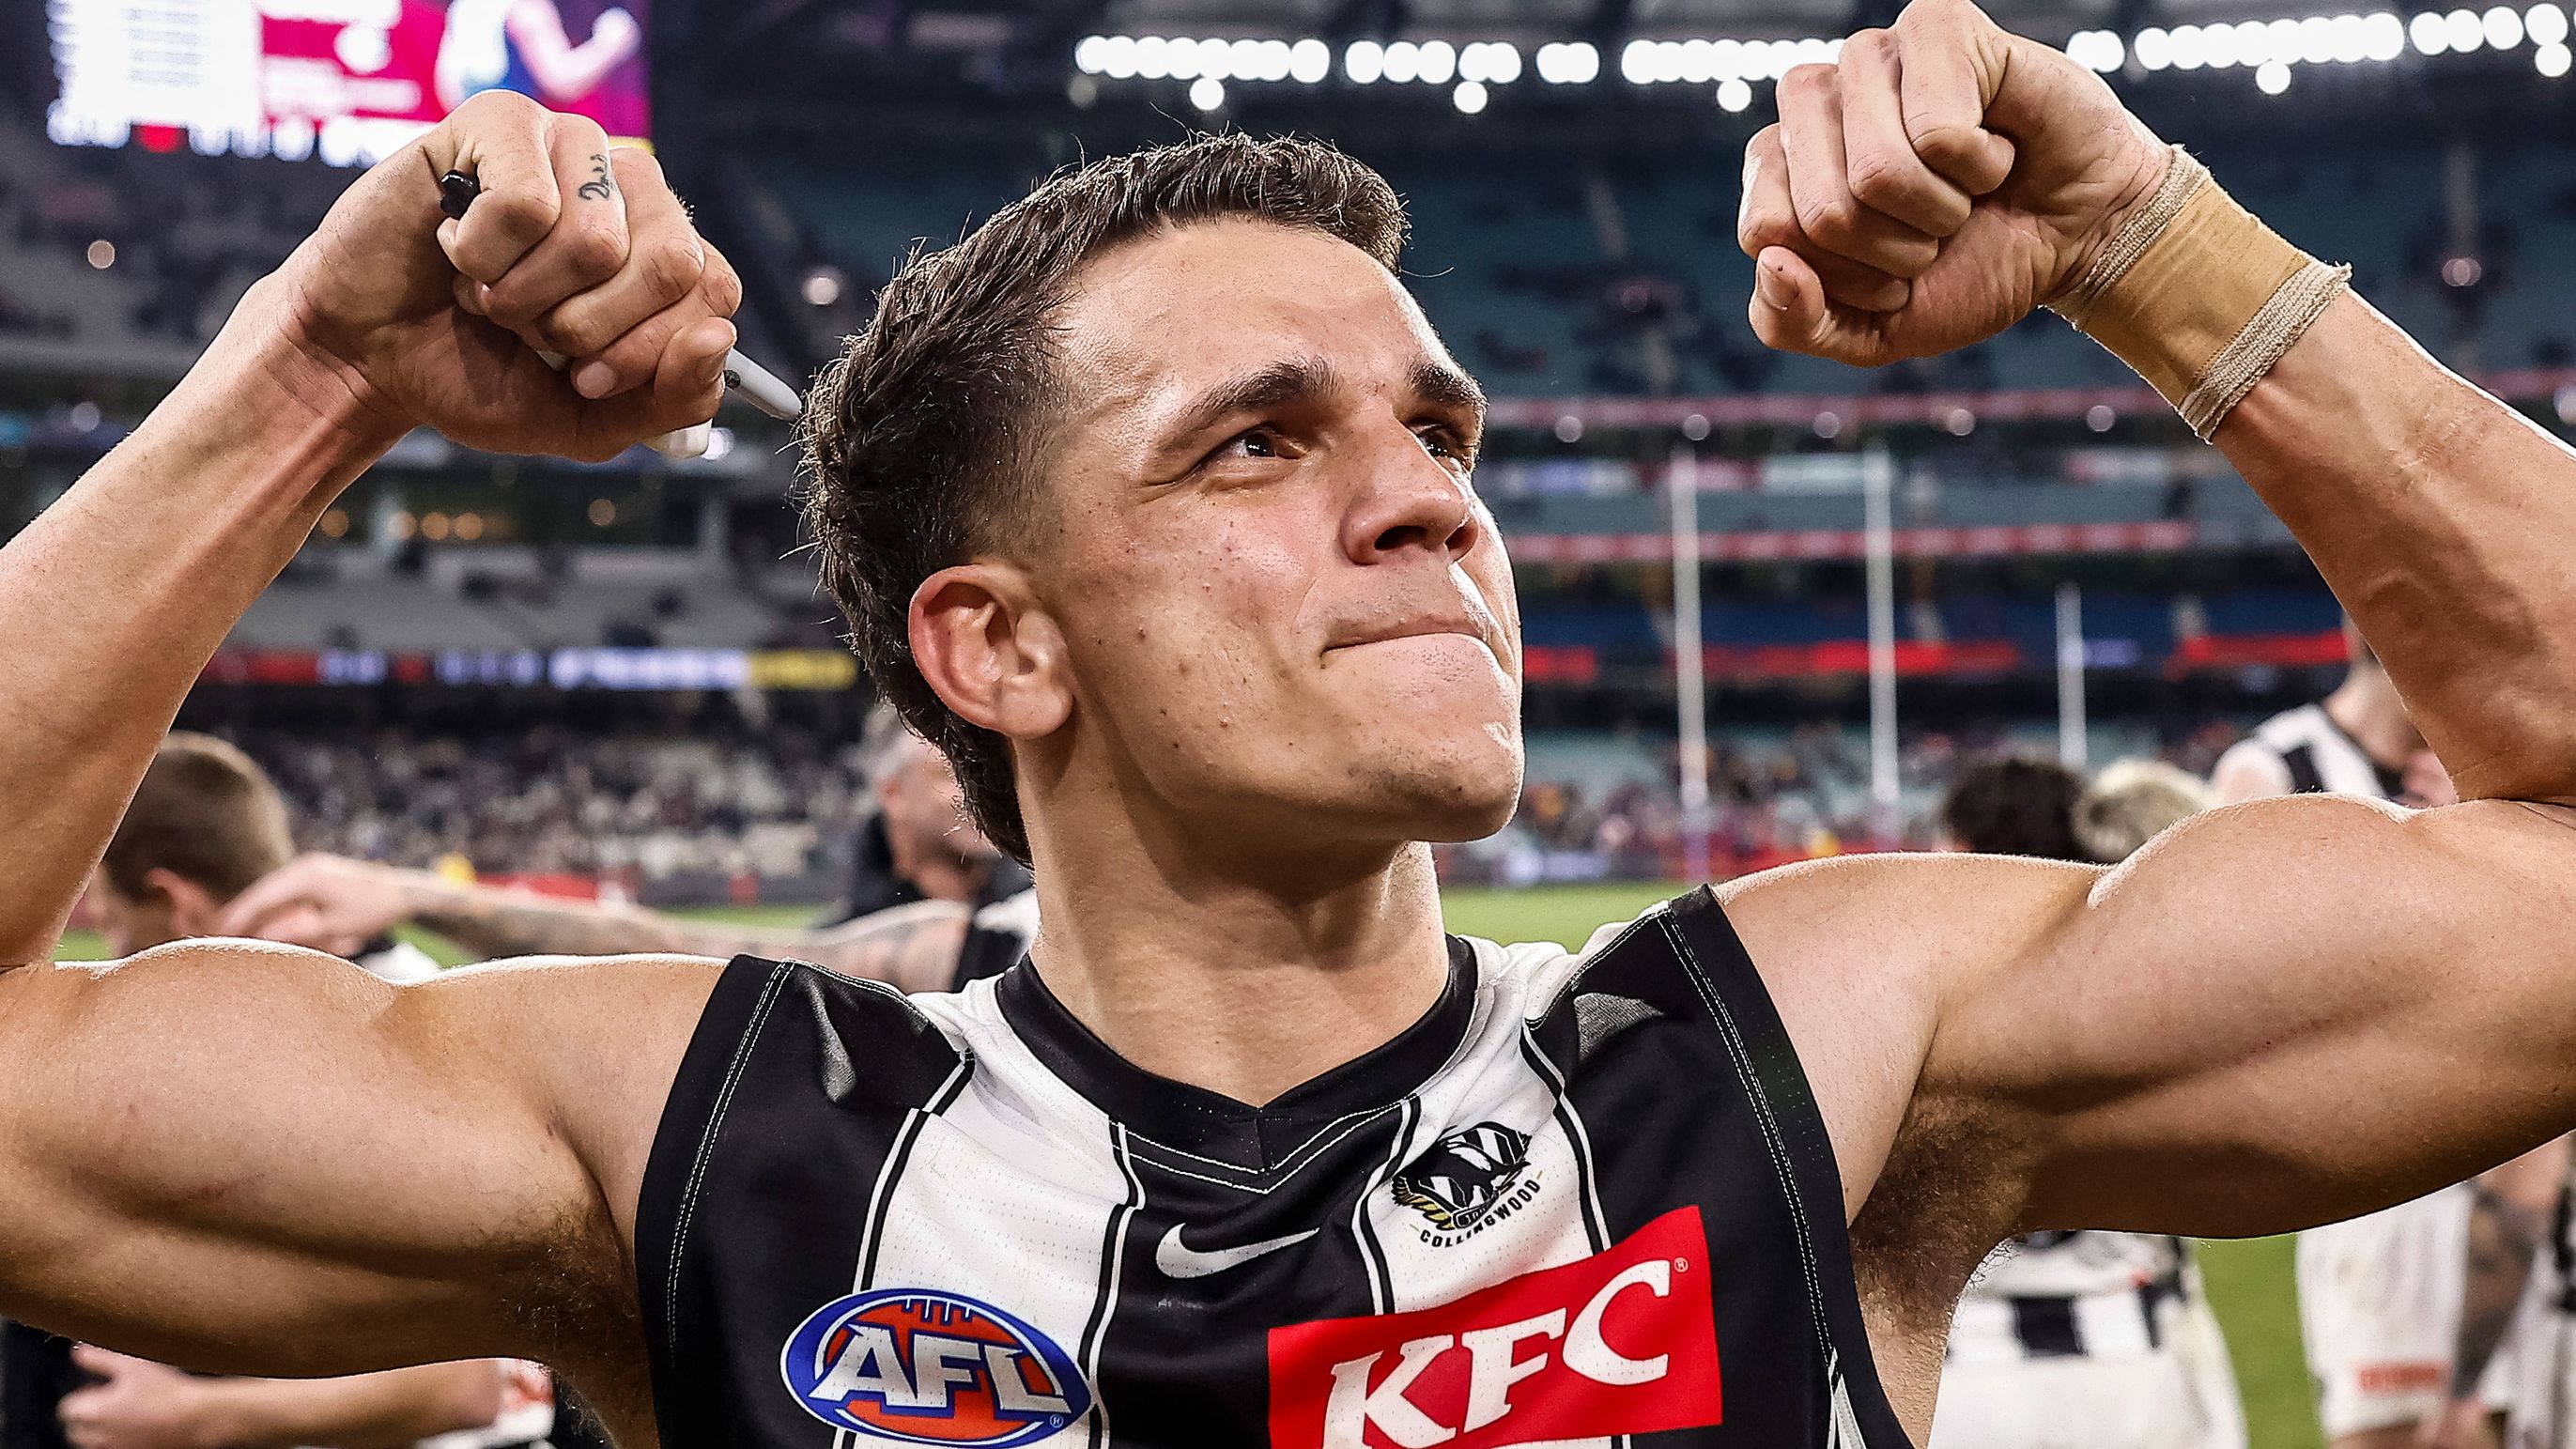 Ash Johnson of the Magpies acknowledges the fans after the round 21 AFL match between the Melbourne Demons and the Collingwood Magpies at Melbourne Cricket Ground on August 05, 2022 in Melbourne, Australia. (Photo by Darrian Traynor/Getty Images)